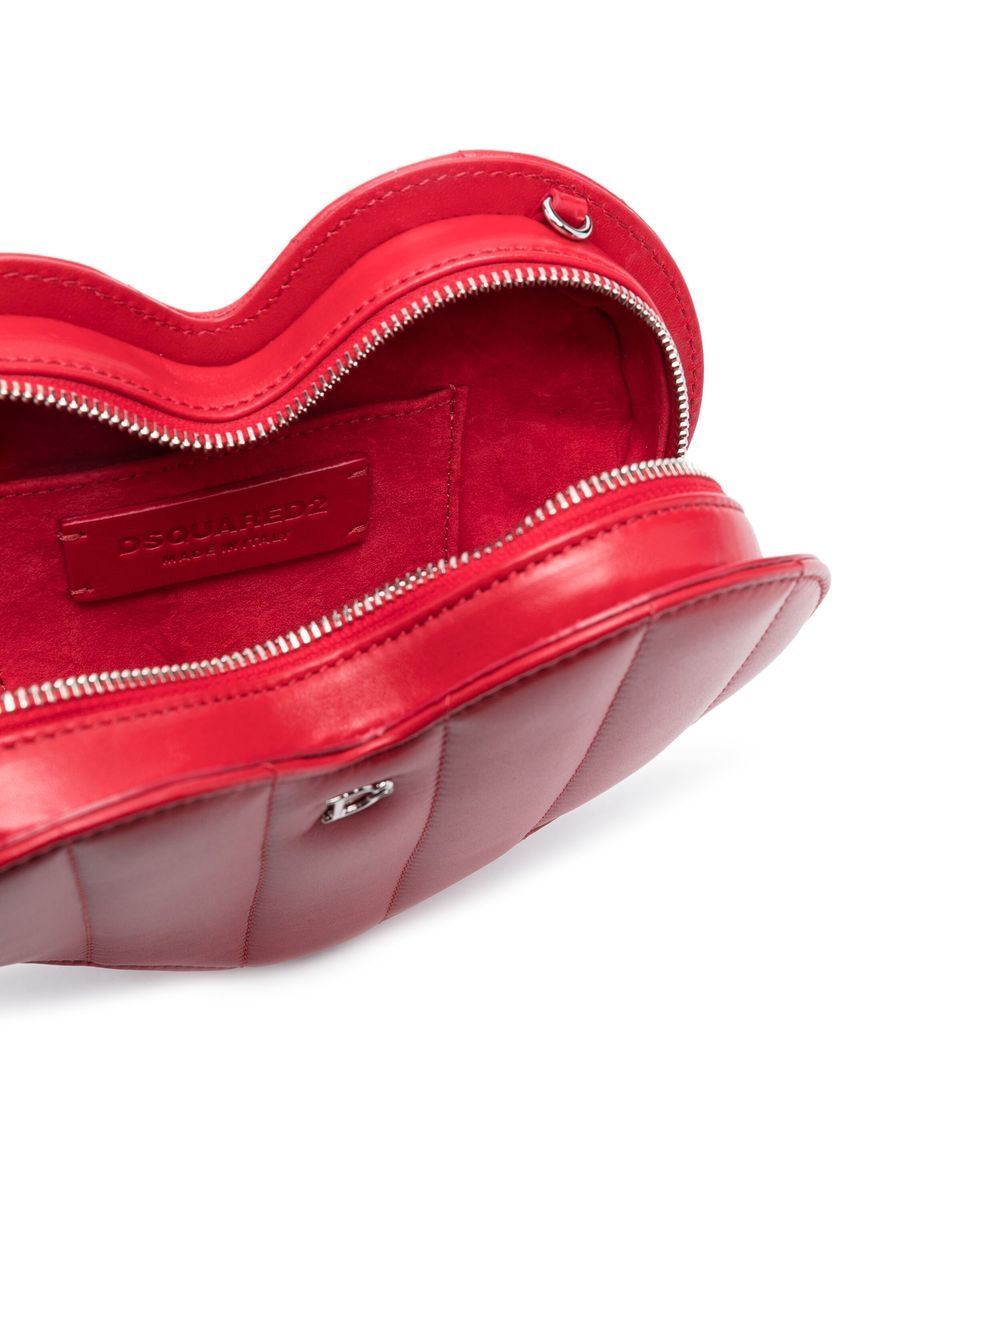 Dsquared2 Quilted Leather Heart Crossbody Bag In Red